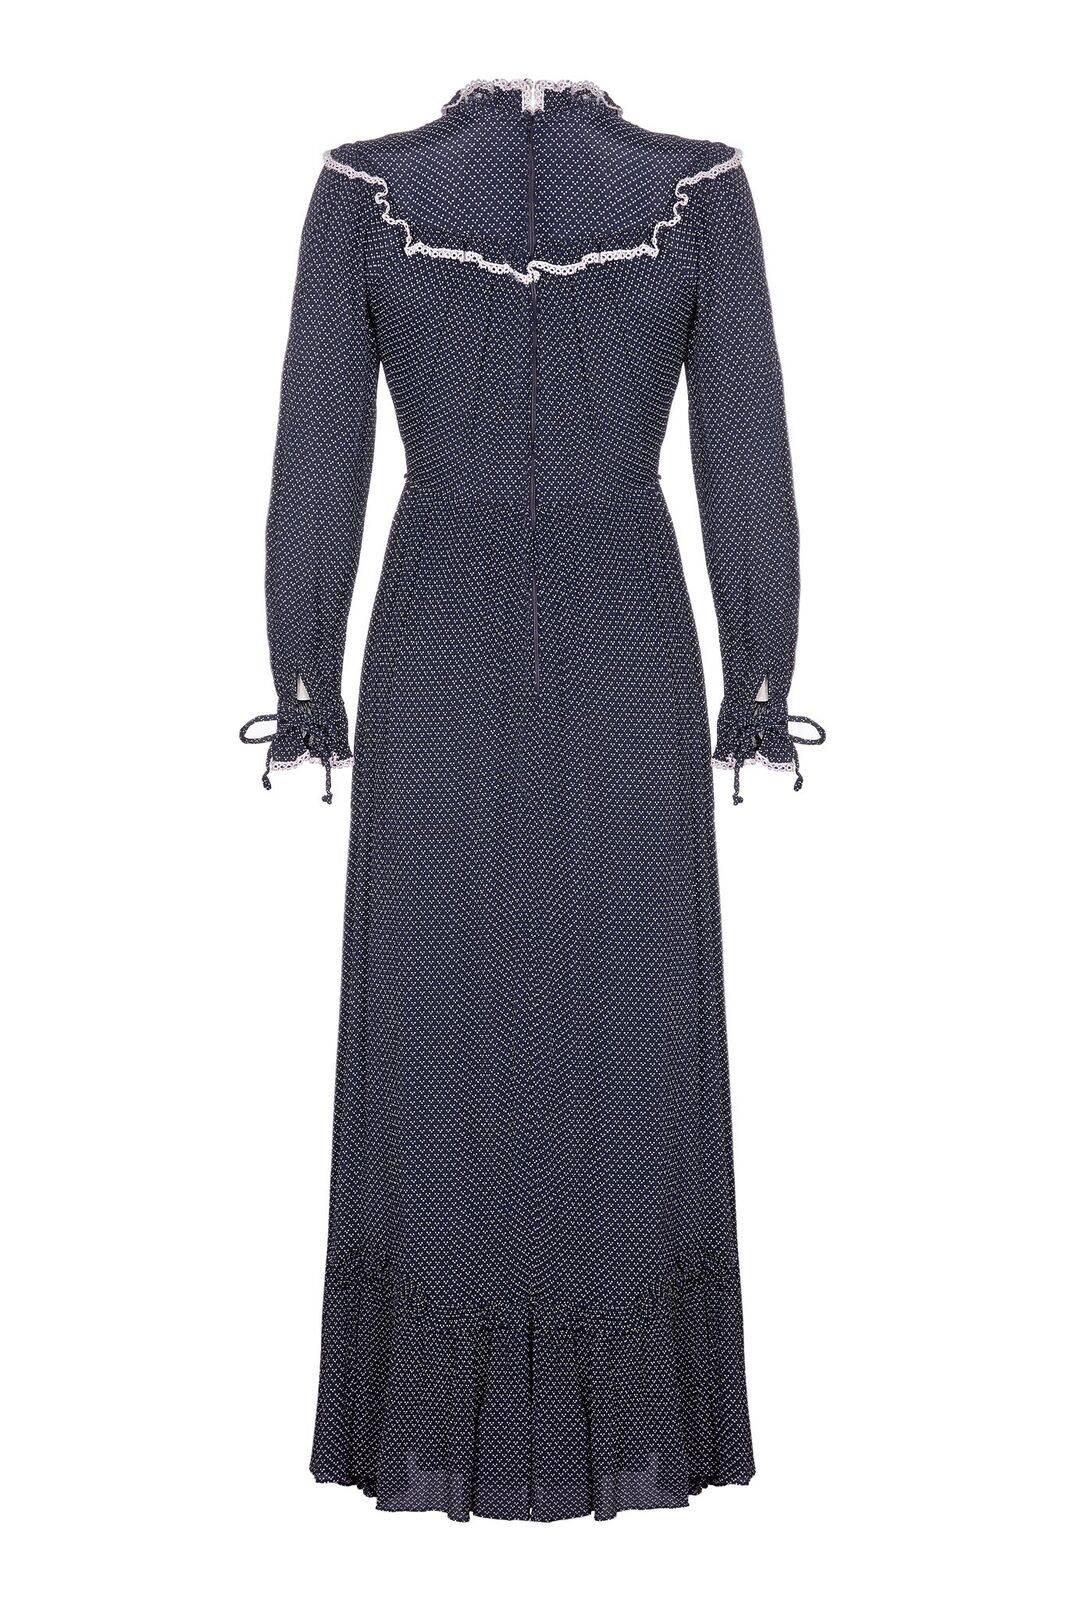 This enchanting Vera Mont 1970s prairie dress with high-collar neckline and ruffle detail is a fine example of this classic style. The lightweight crepe overlay is a deep navy with white micro dot formation surface design. The collar is a close